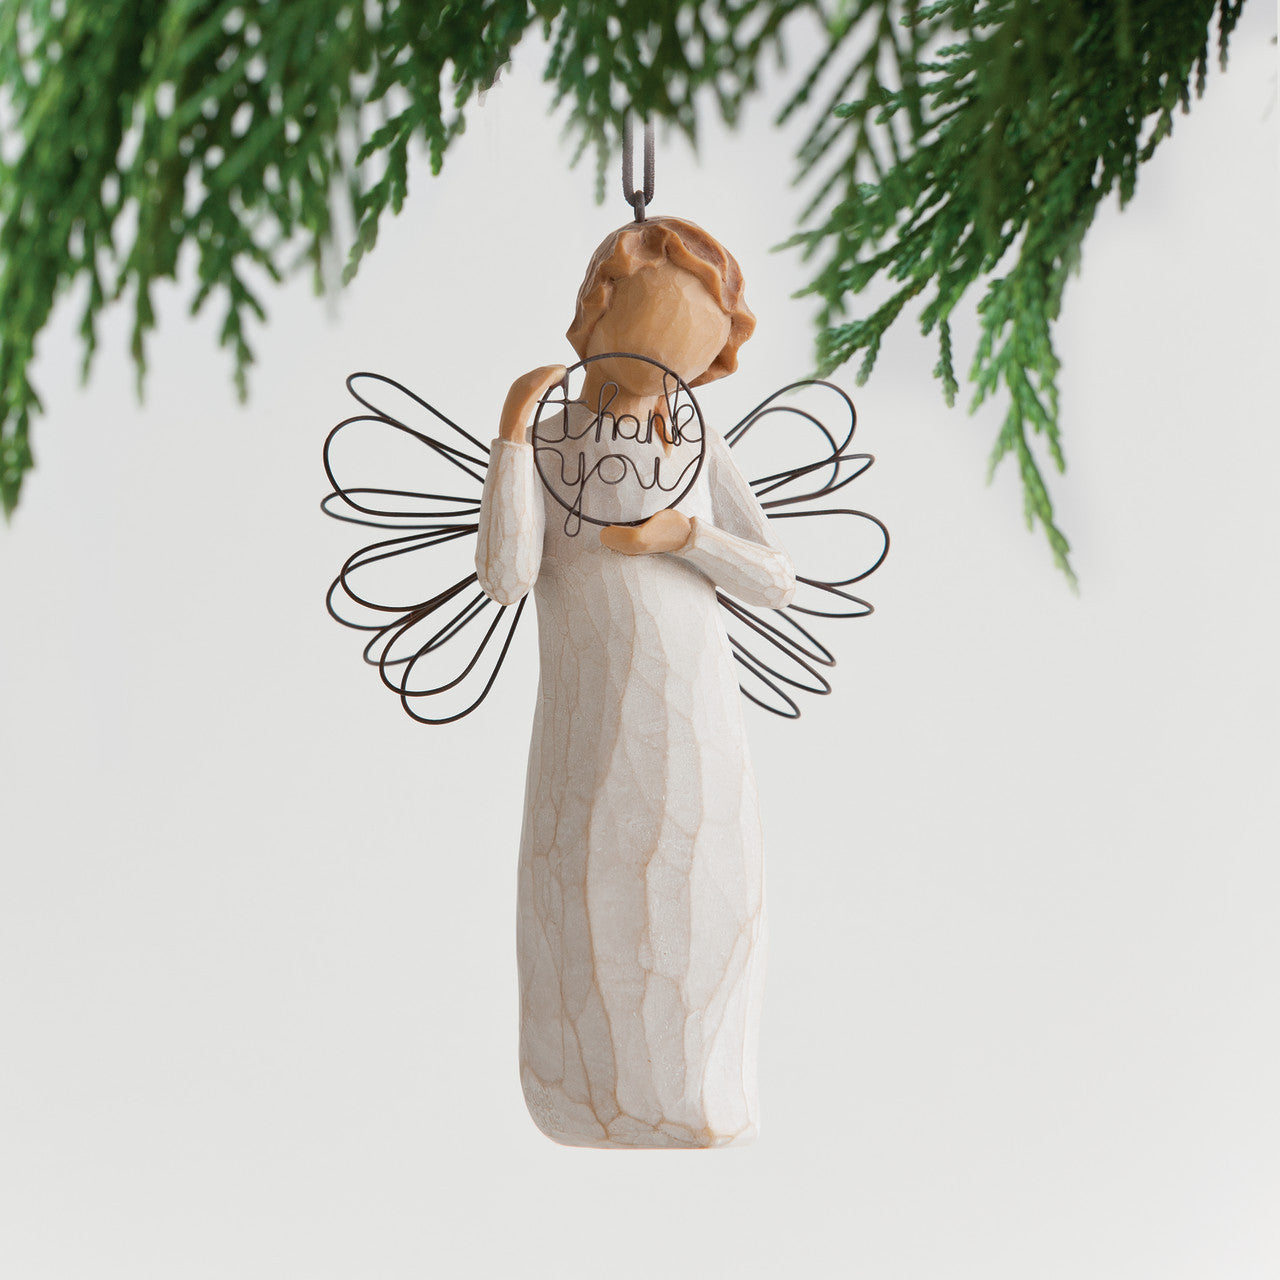 Willow Tree® Just For You Ornament by Demdaco Figurine Willow Tree   